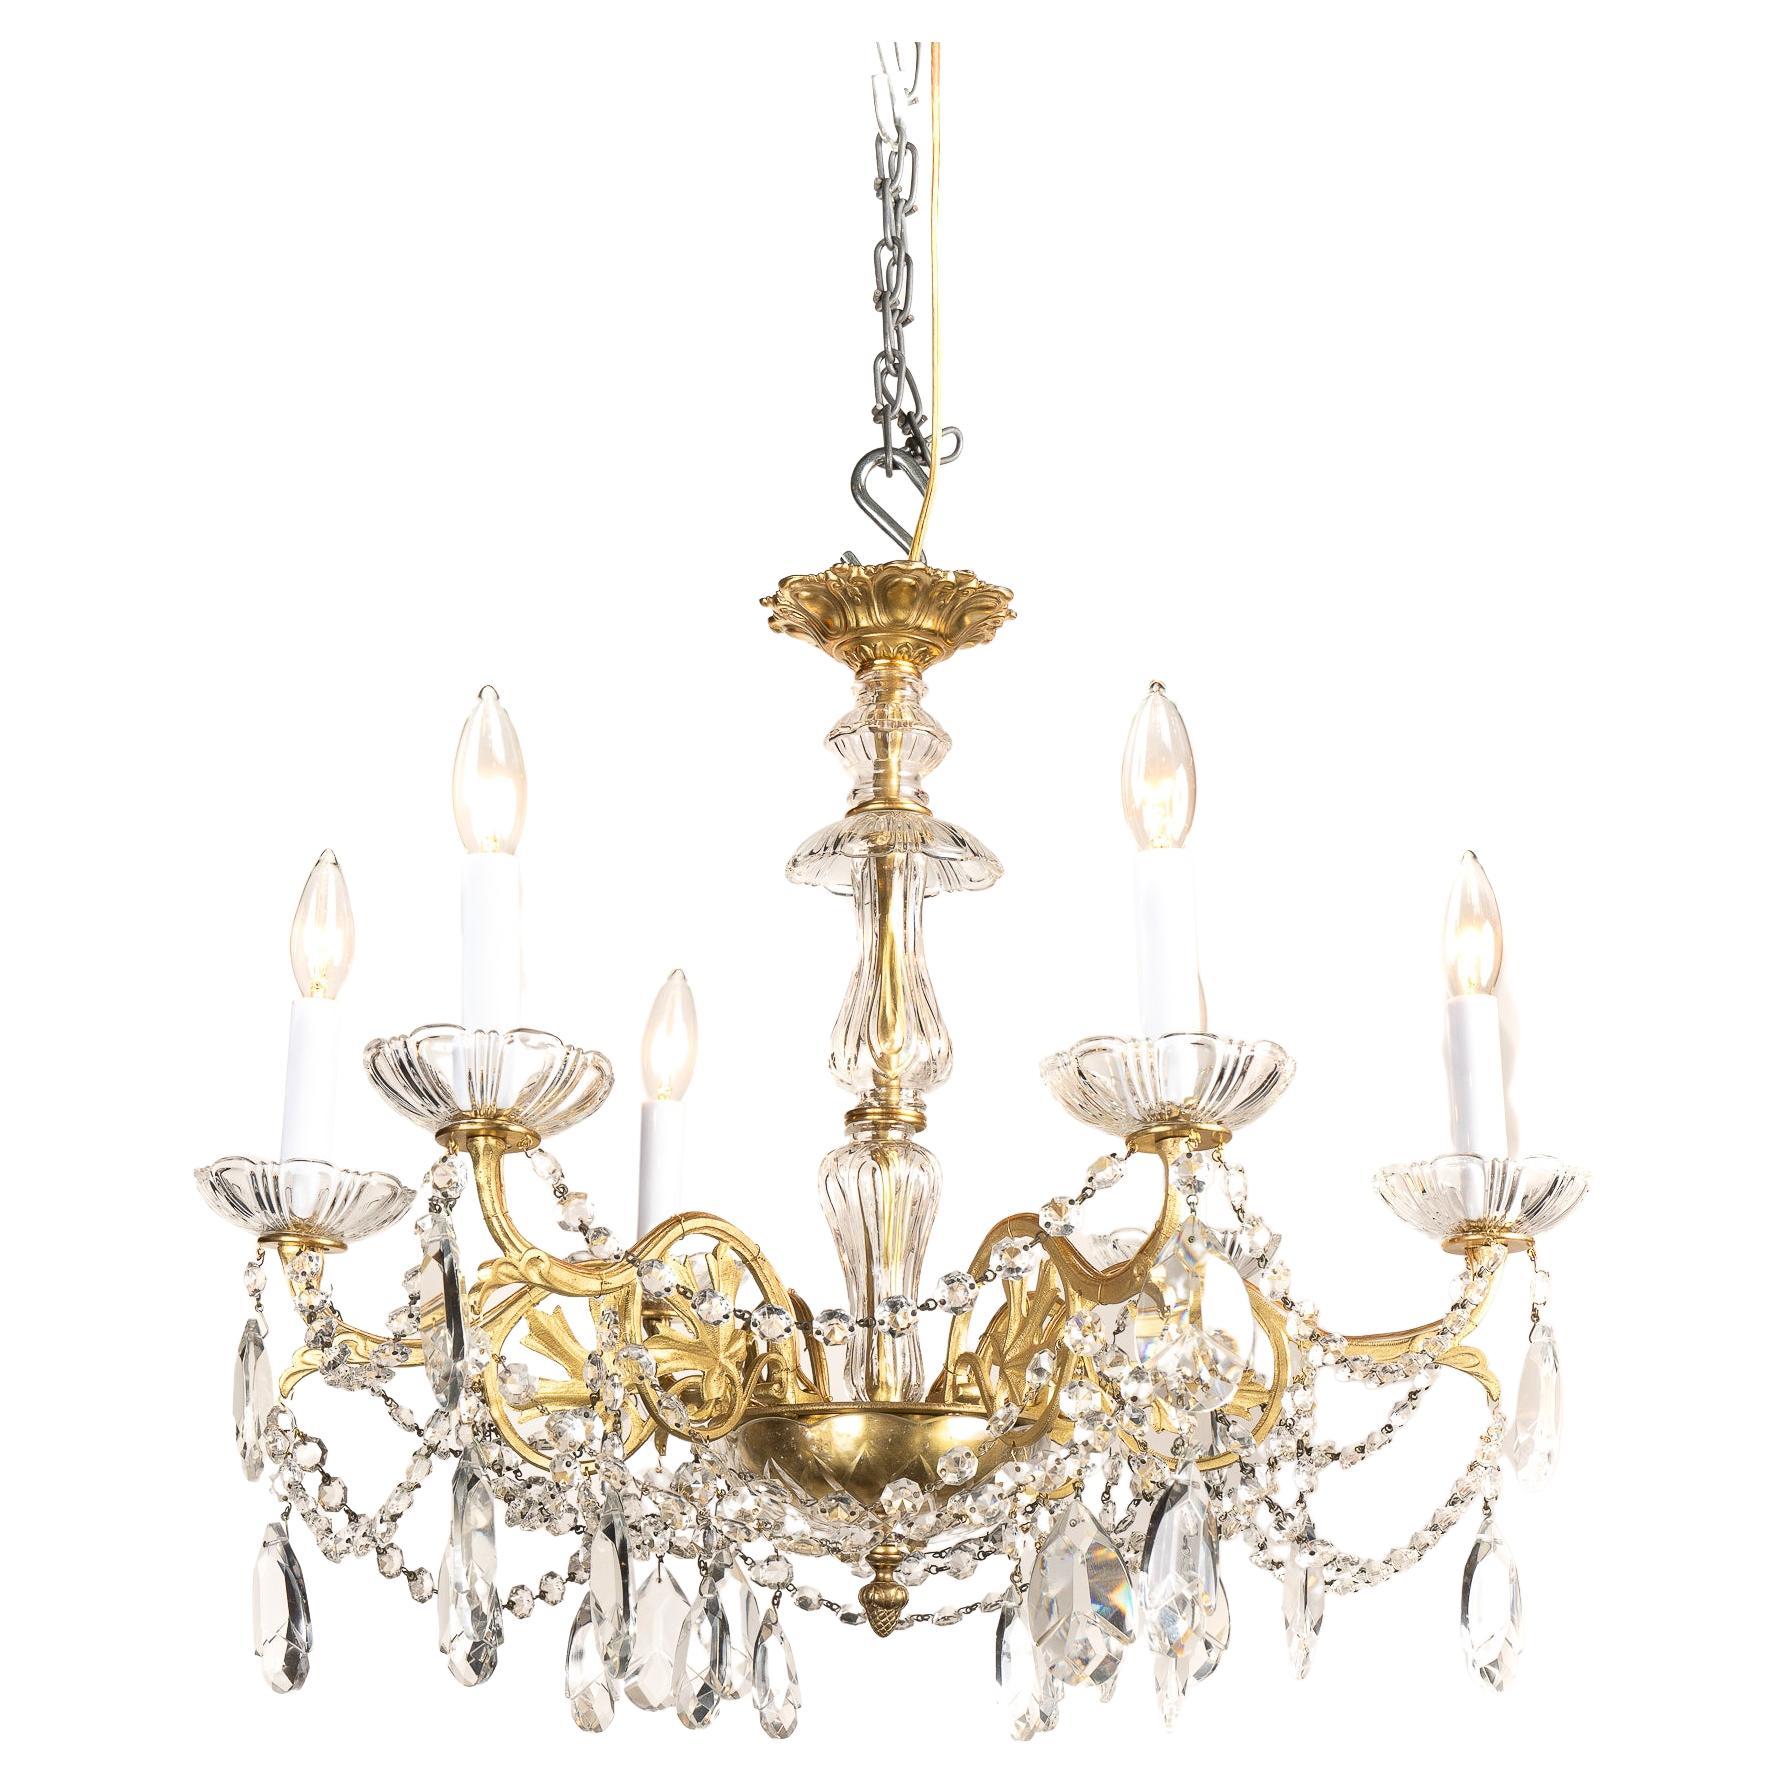 Bronze and Crystal Louis XVI Chandelier with Leaf Motif, Late 19th Century 